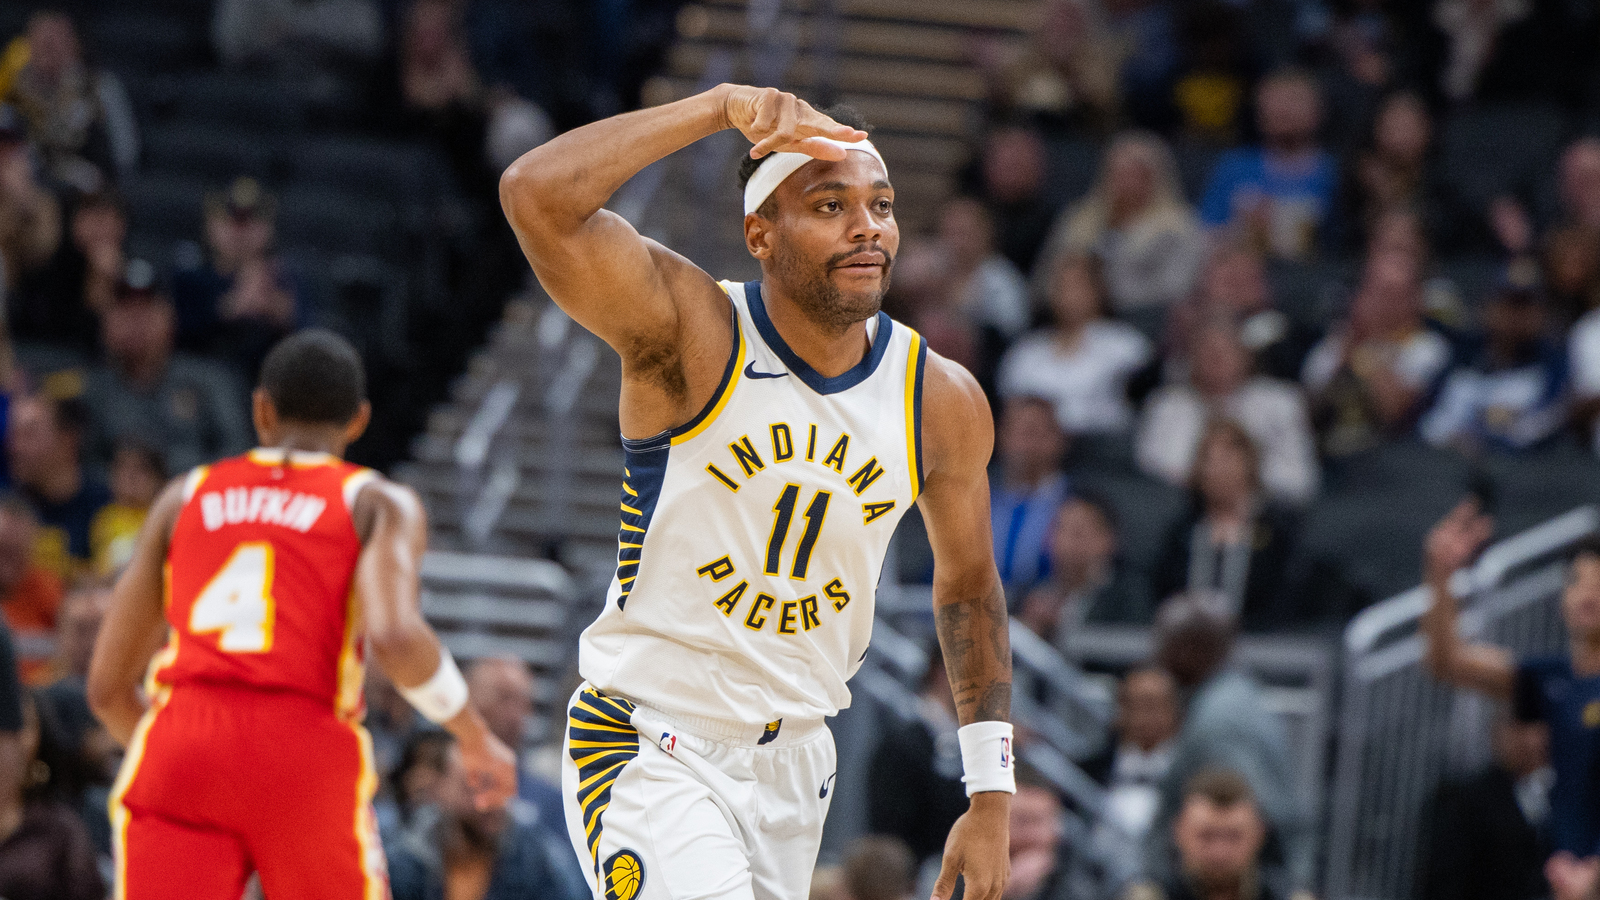 Pacers x Black Panther Jersey (original tweet in comments) : r/pacers